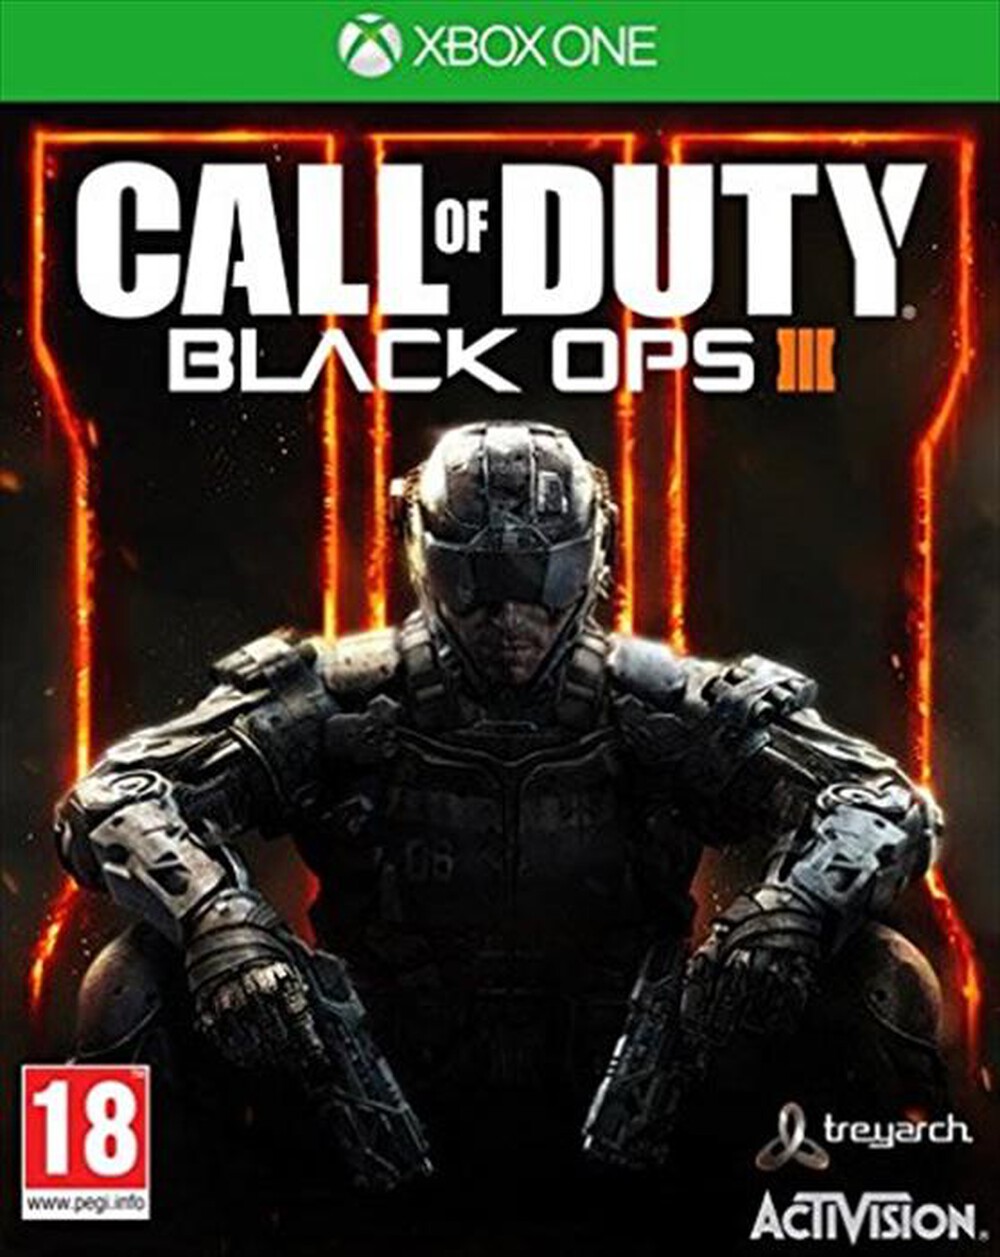 "ACTIVISION-BLIZZARD - Call of Duty Black Ops III Xbox One"